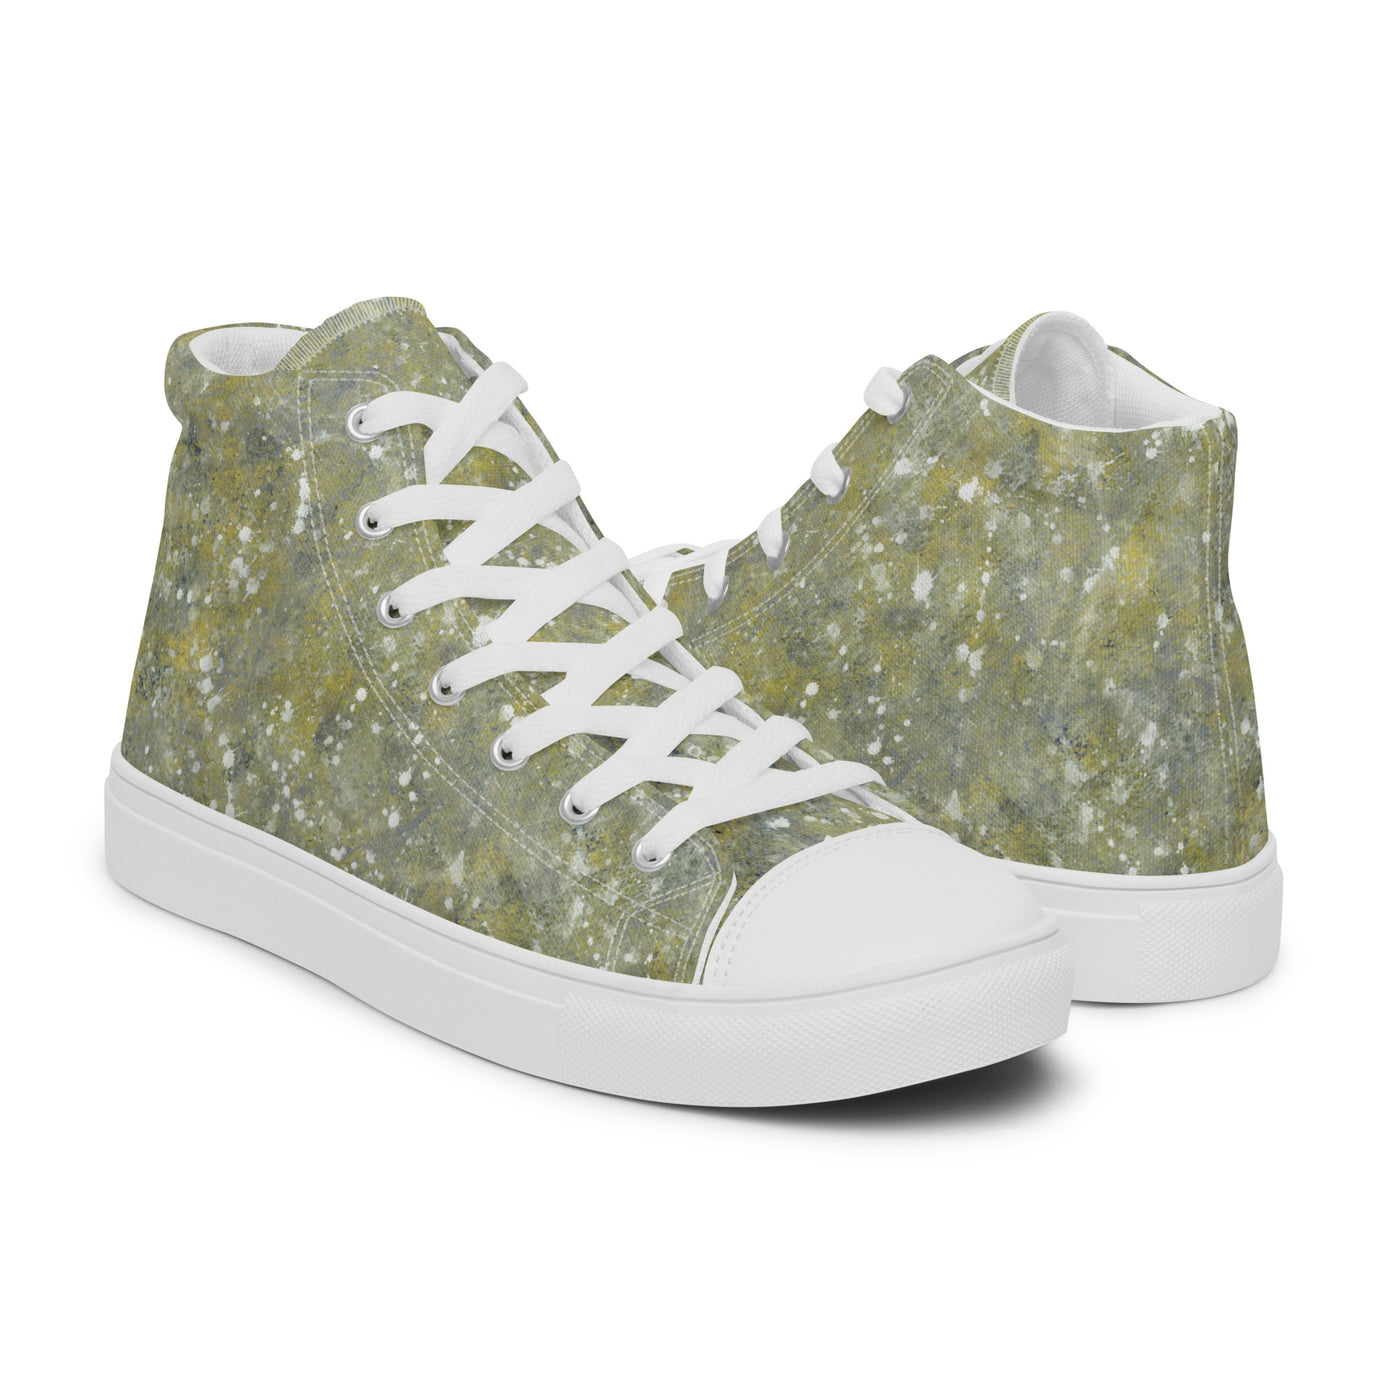 Playdate Art high top canvas shoes